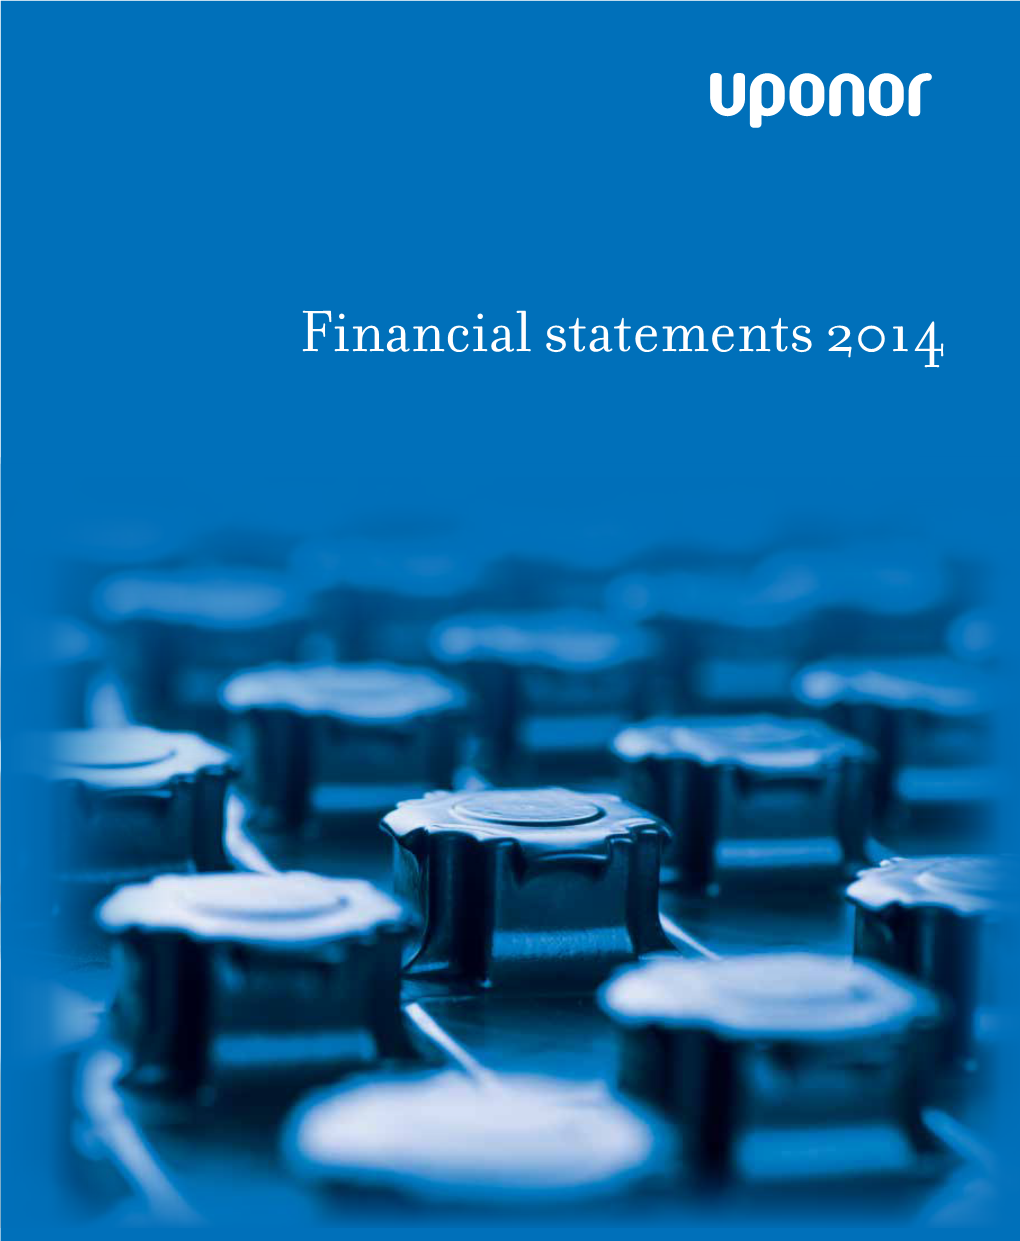 Financial Statements 2014 Important Dates in 2015